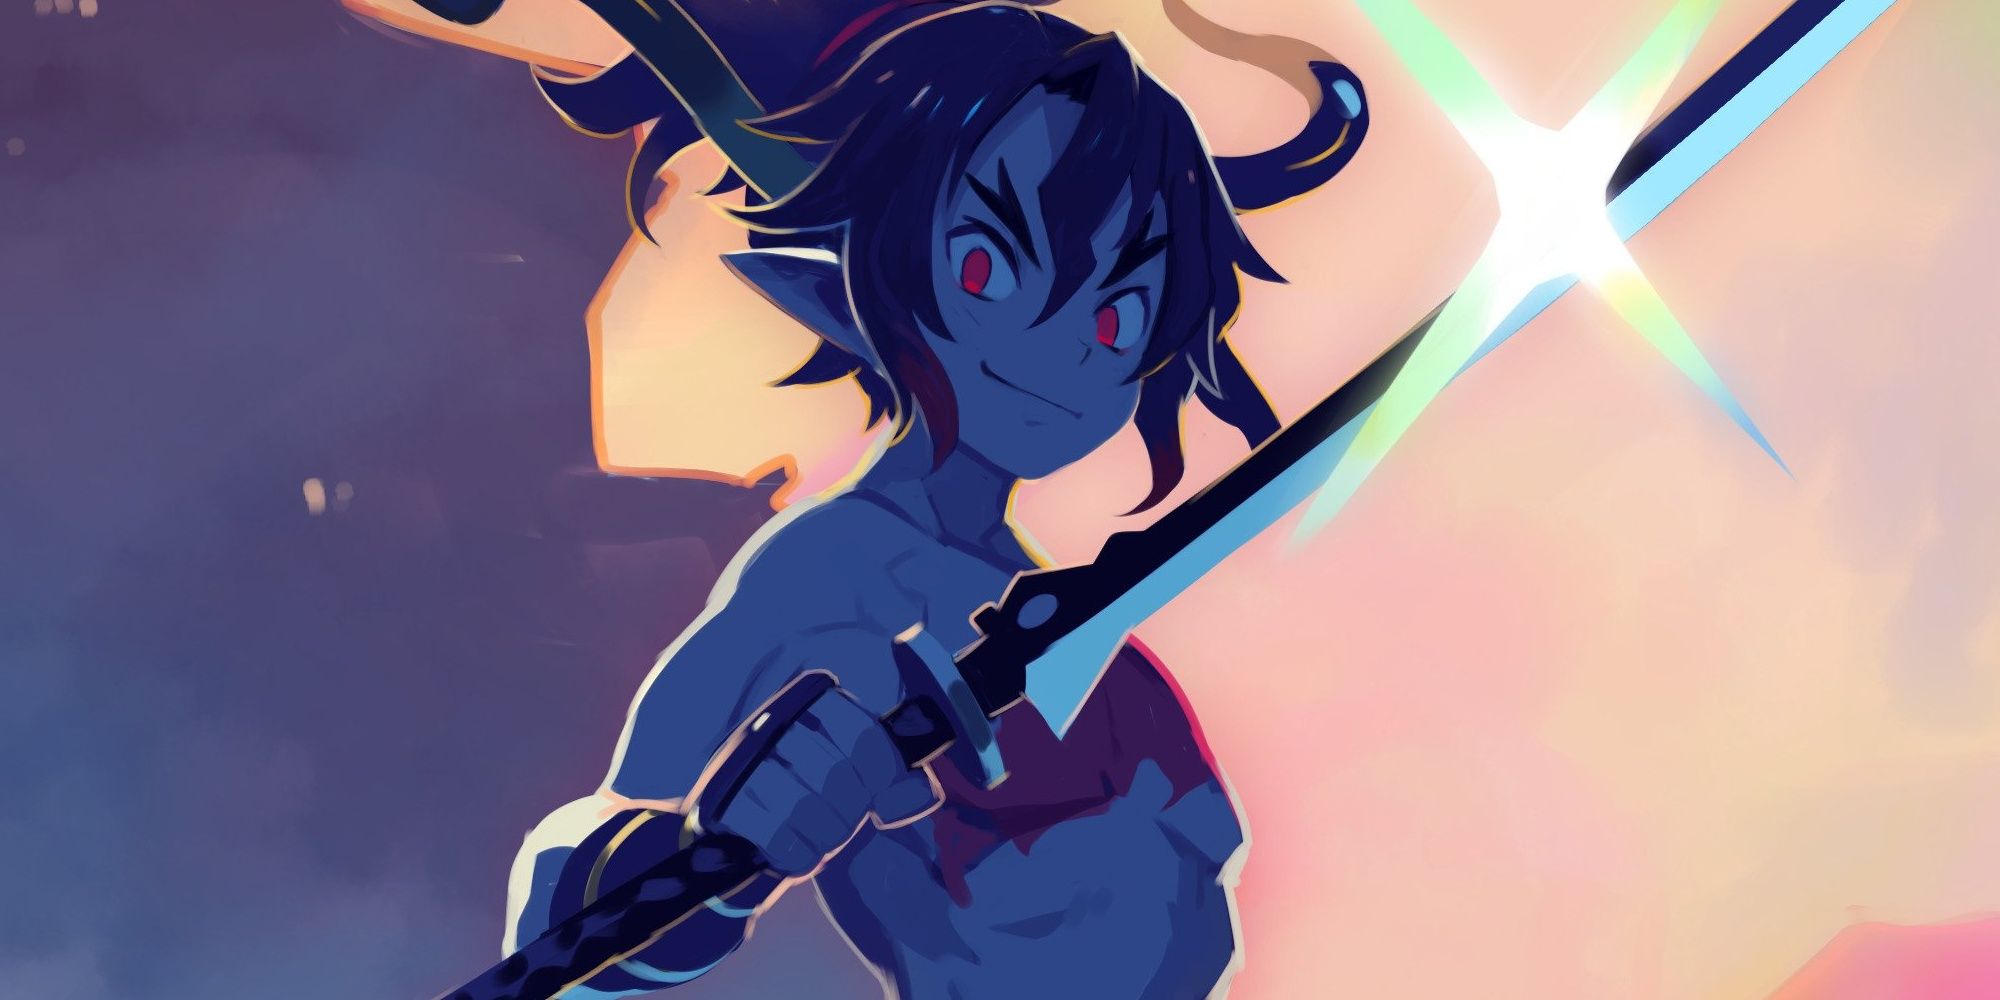 Fuji from Disgaea 7 unsheaths his sword with a smile.